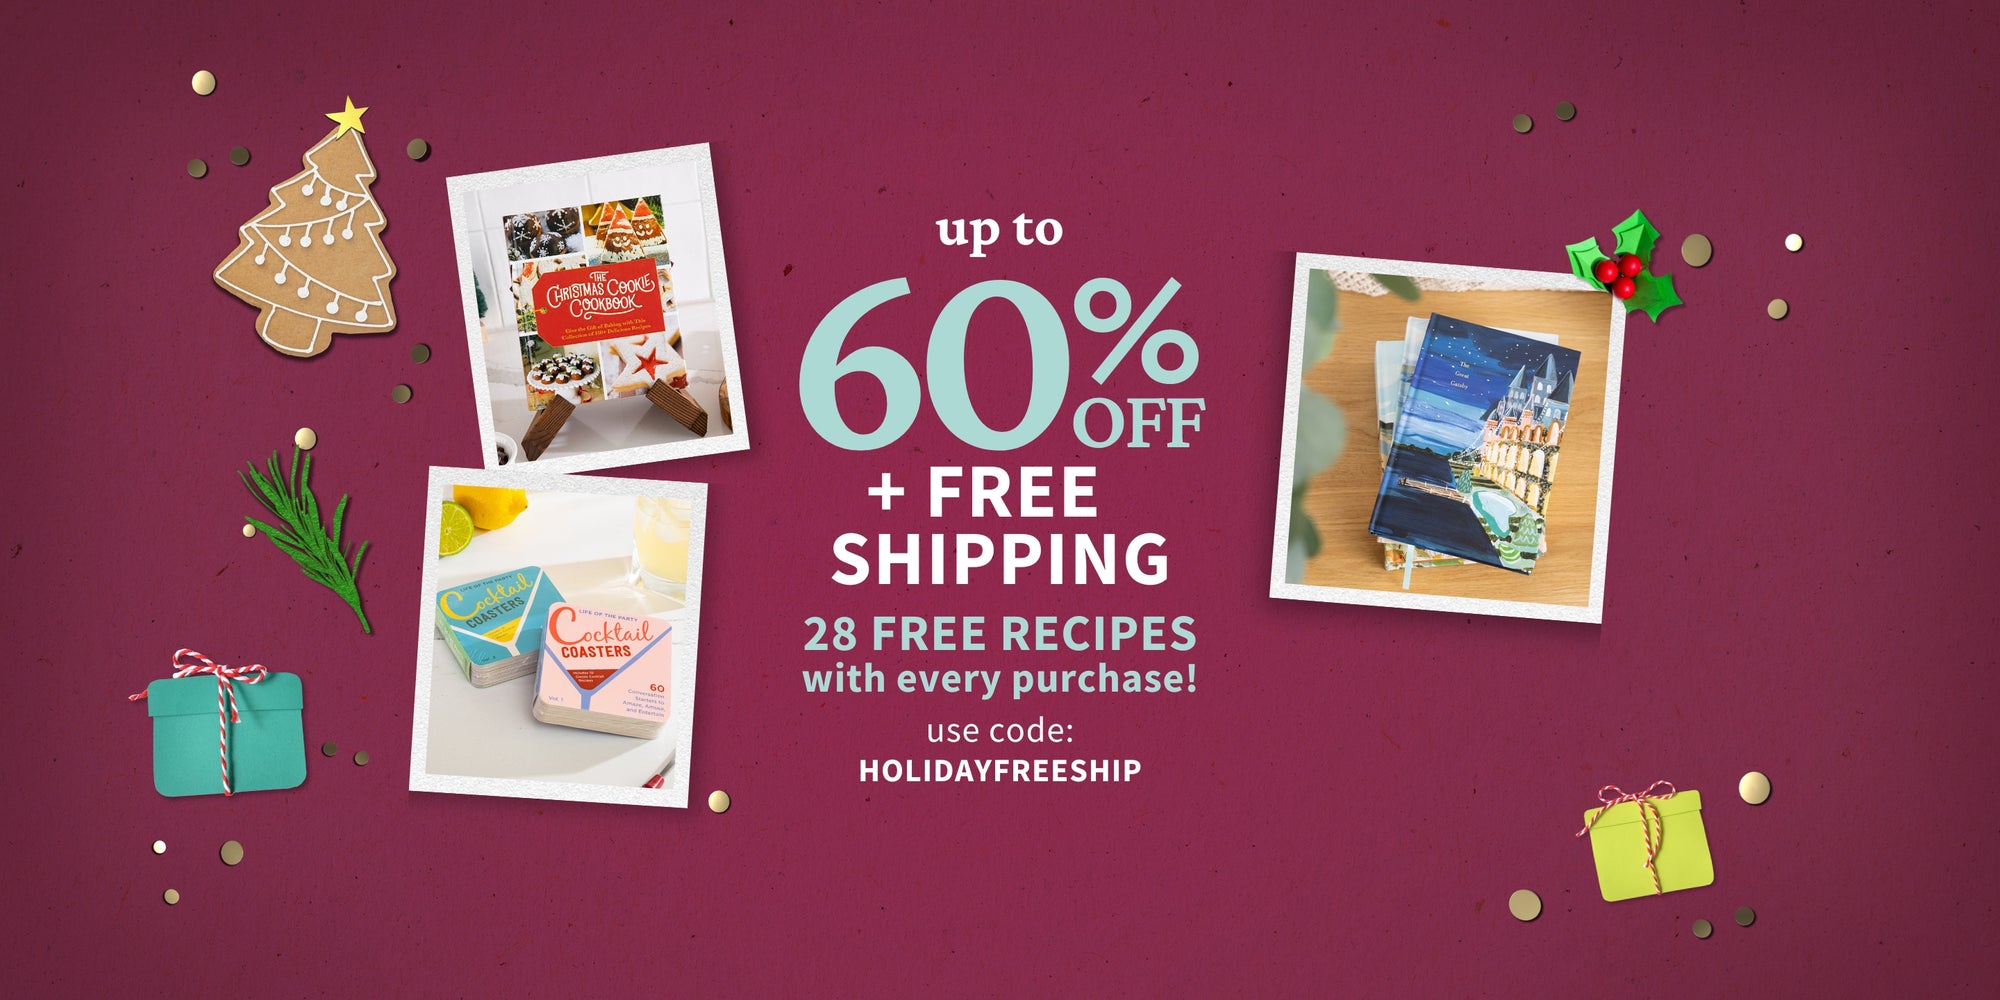 Black Friday - Up to 60% off Plus Free Shipping with promo code HOLIDAYFREESHIP